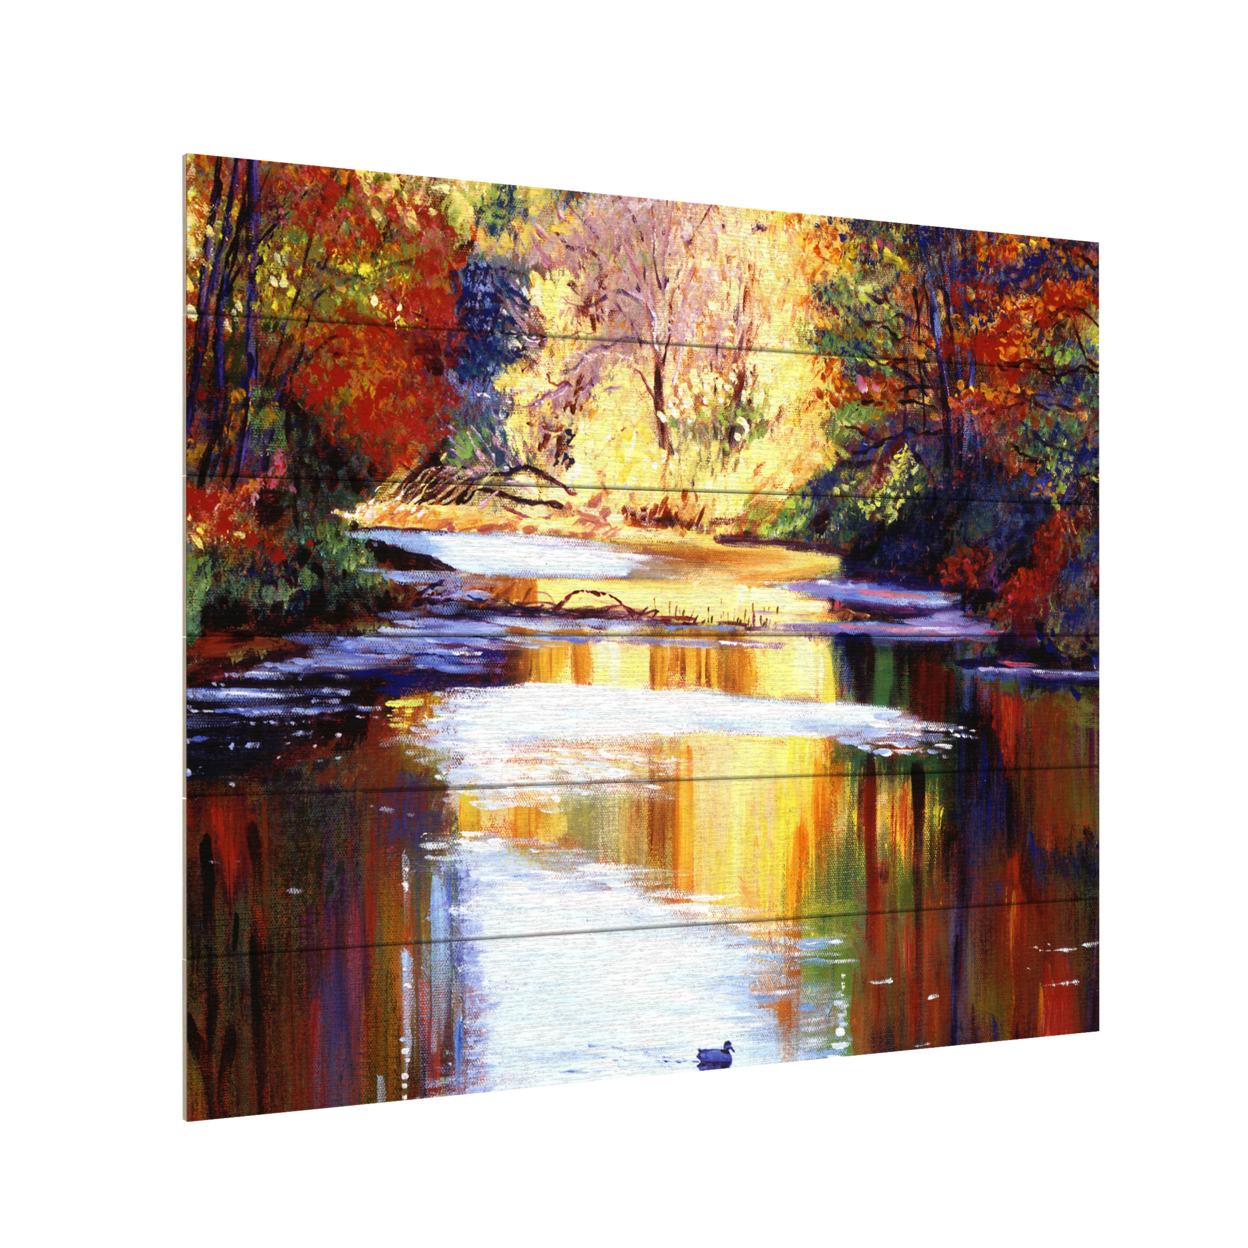 Wooden Slat Art 18 X 22 Inches Titled Reflections Of August Ready To Hang Home Decor Picture